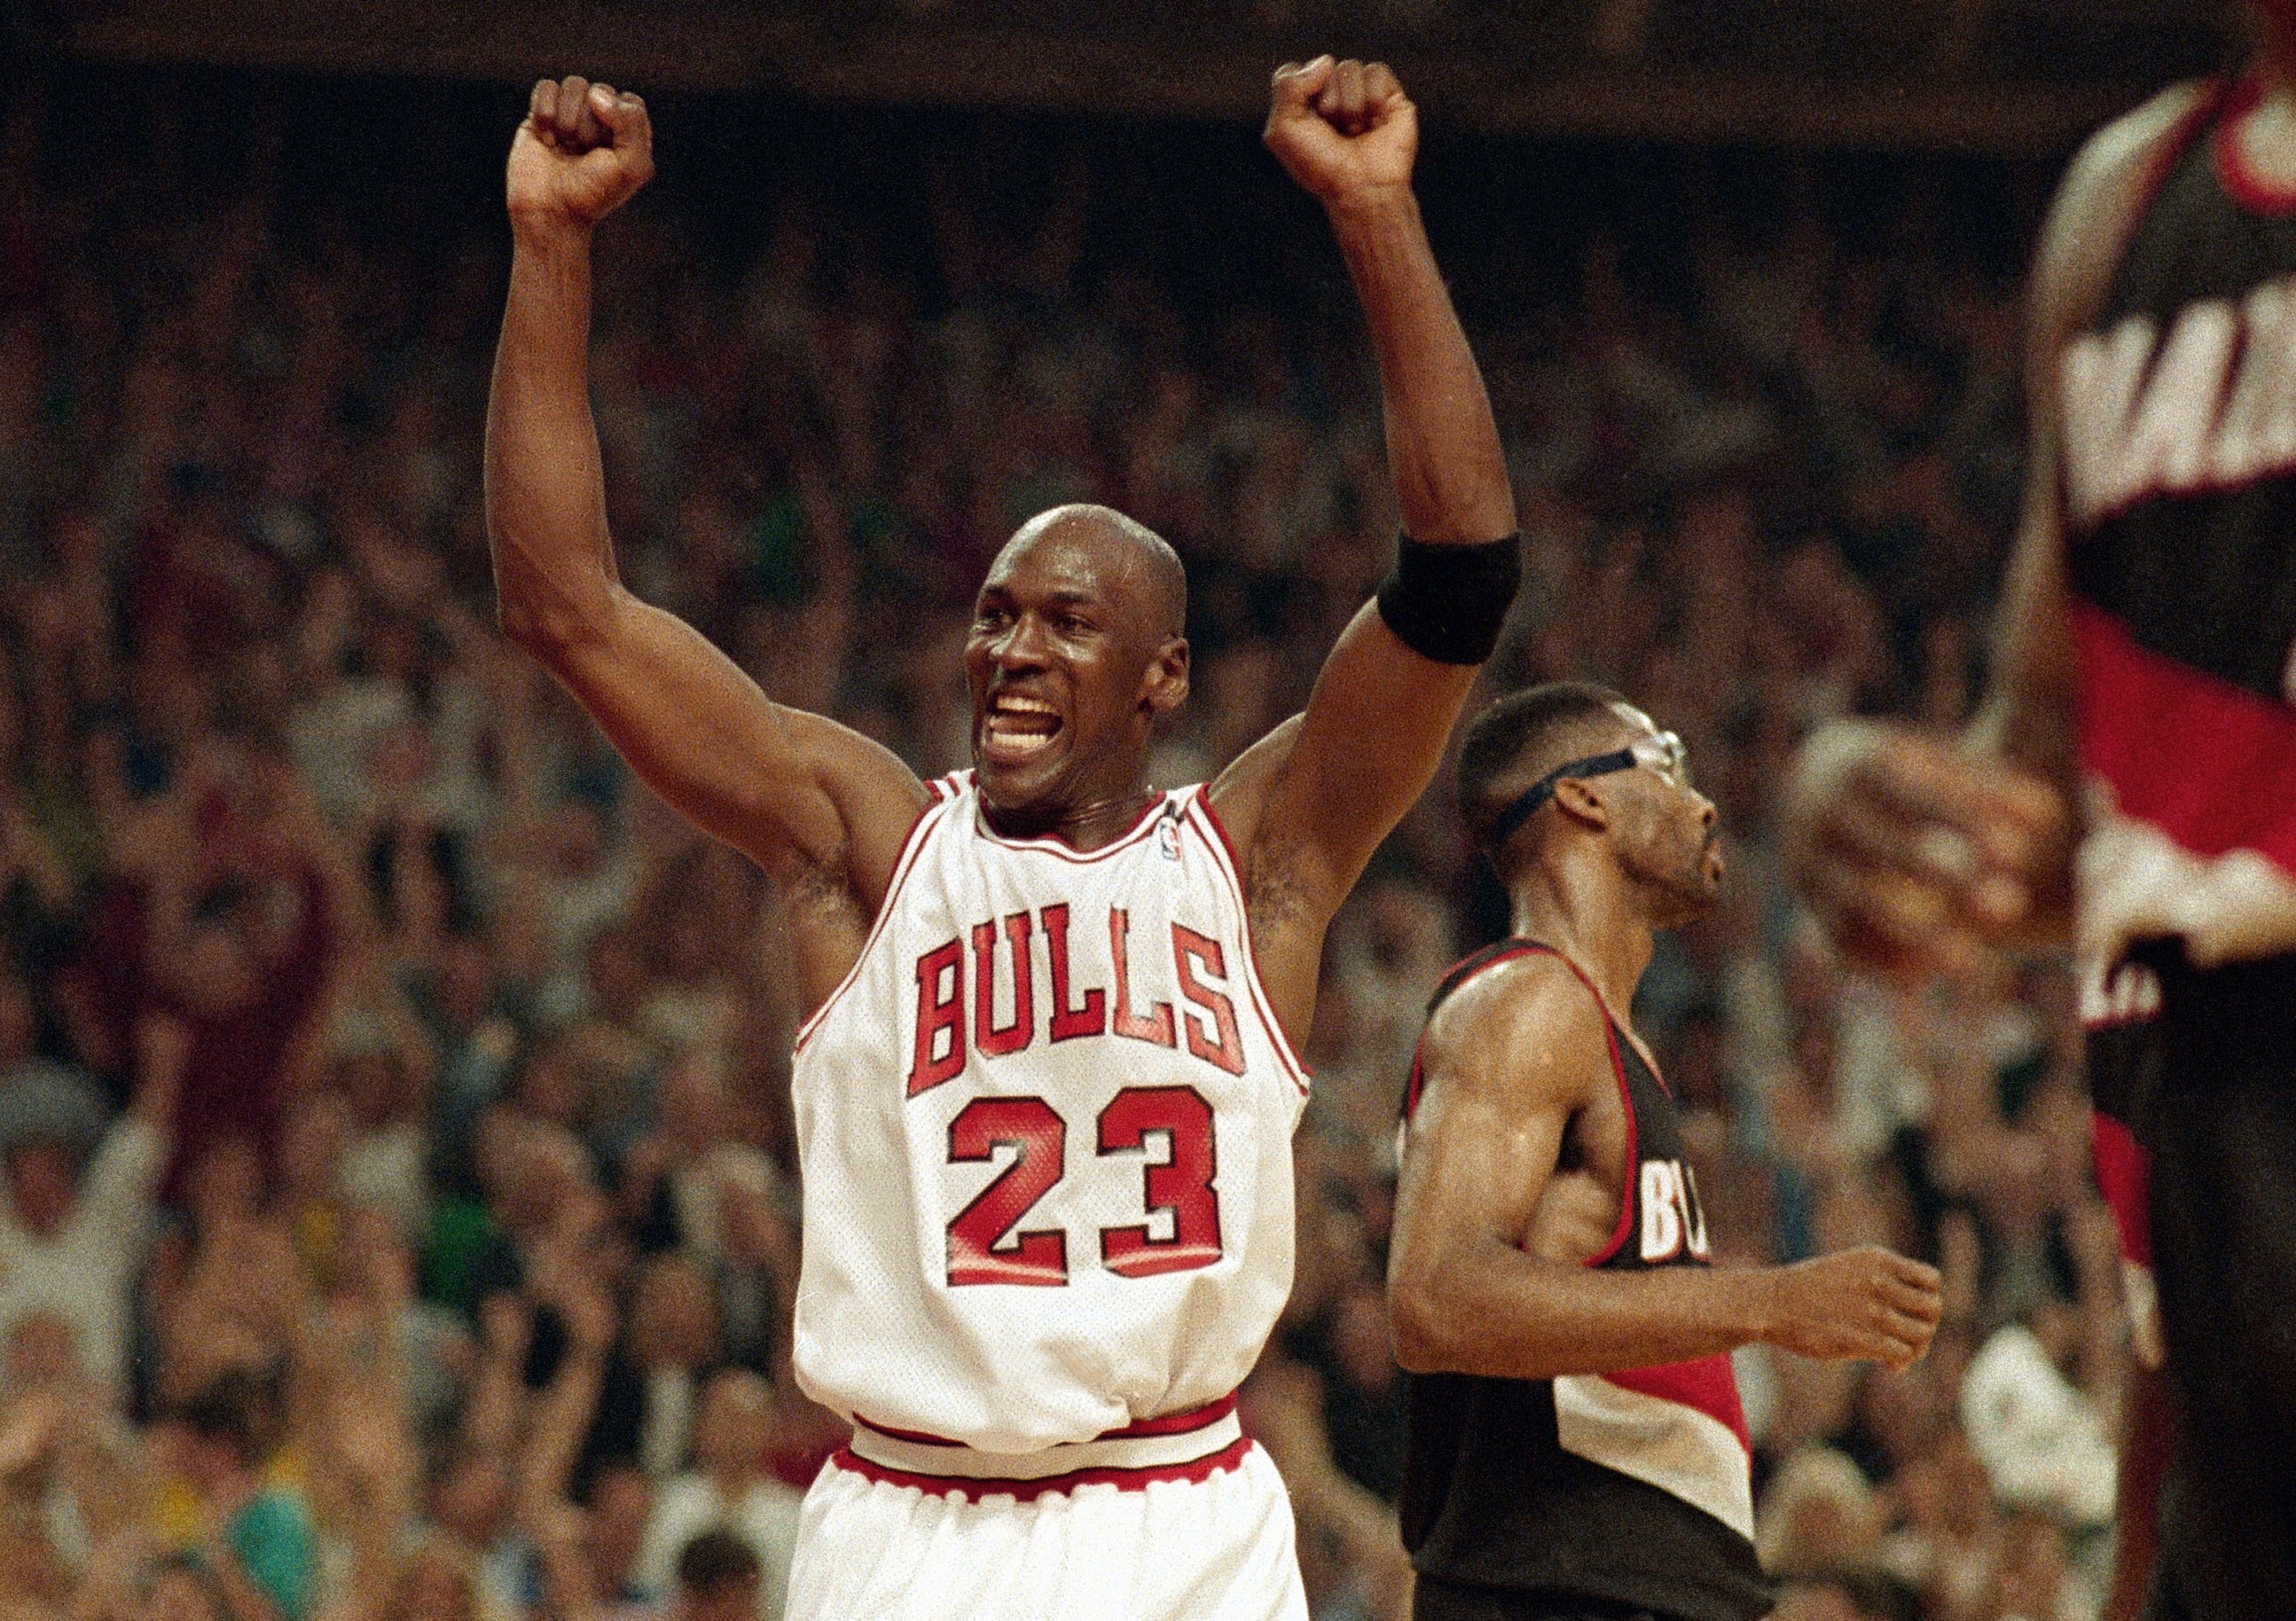 Chicago Bulls superstar Michael Jordan celebrates a win over the Portland Trail Blazers in the 1992 NBA Finals in Chicago. Photo: AP